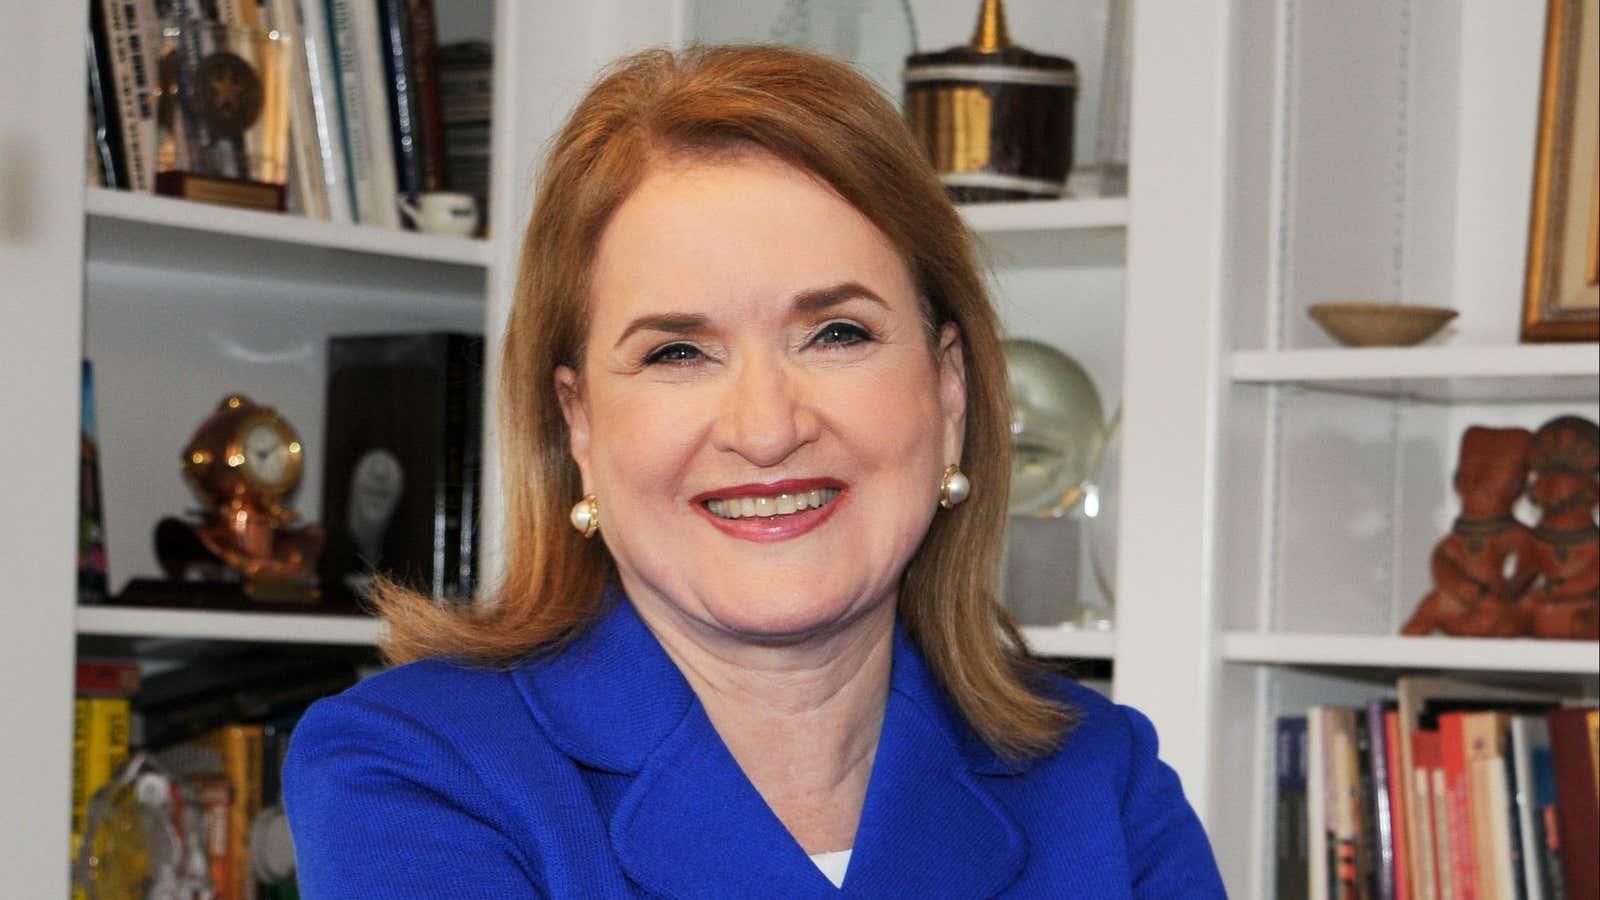 For Rep. Sylvia Garcia, focusing on rumors and perception are obstacles to reaching goals